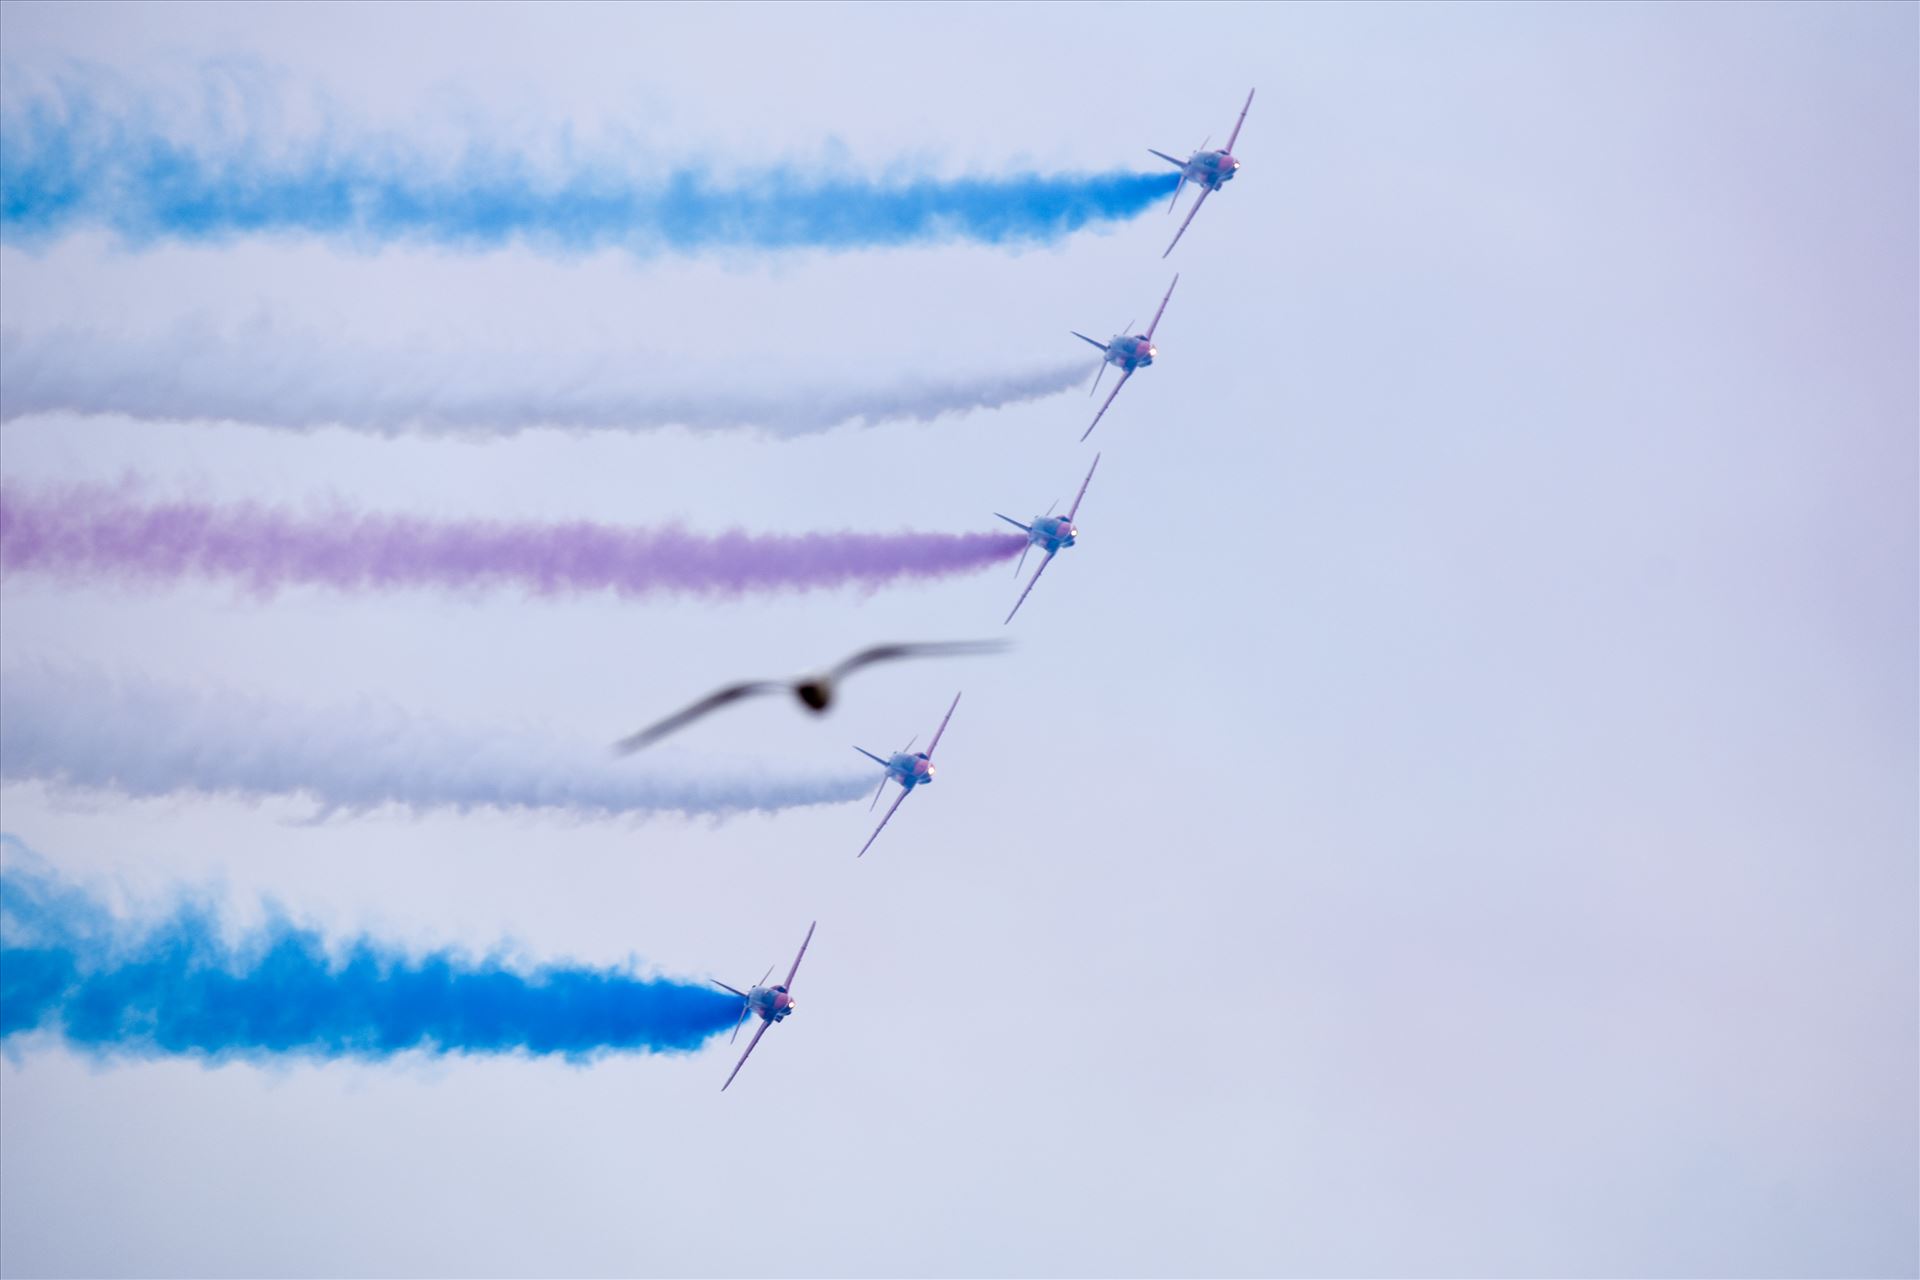 Red Arrows The Red Arrows taken at the Sunderland air show 2016 by philreay